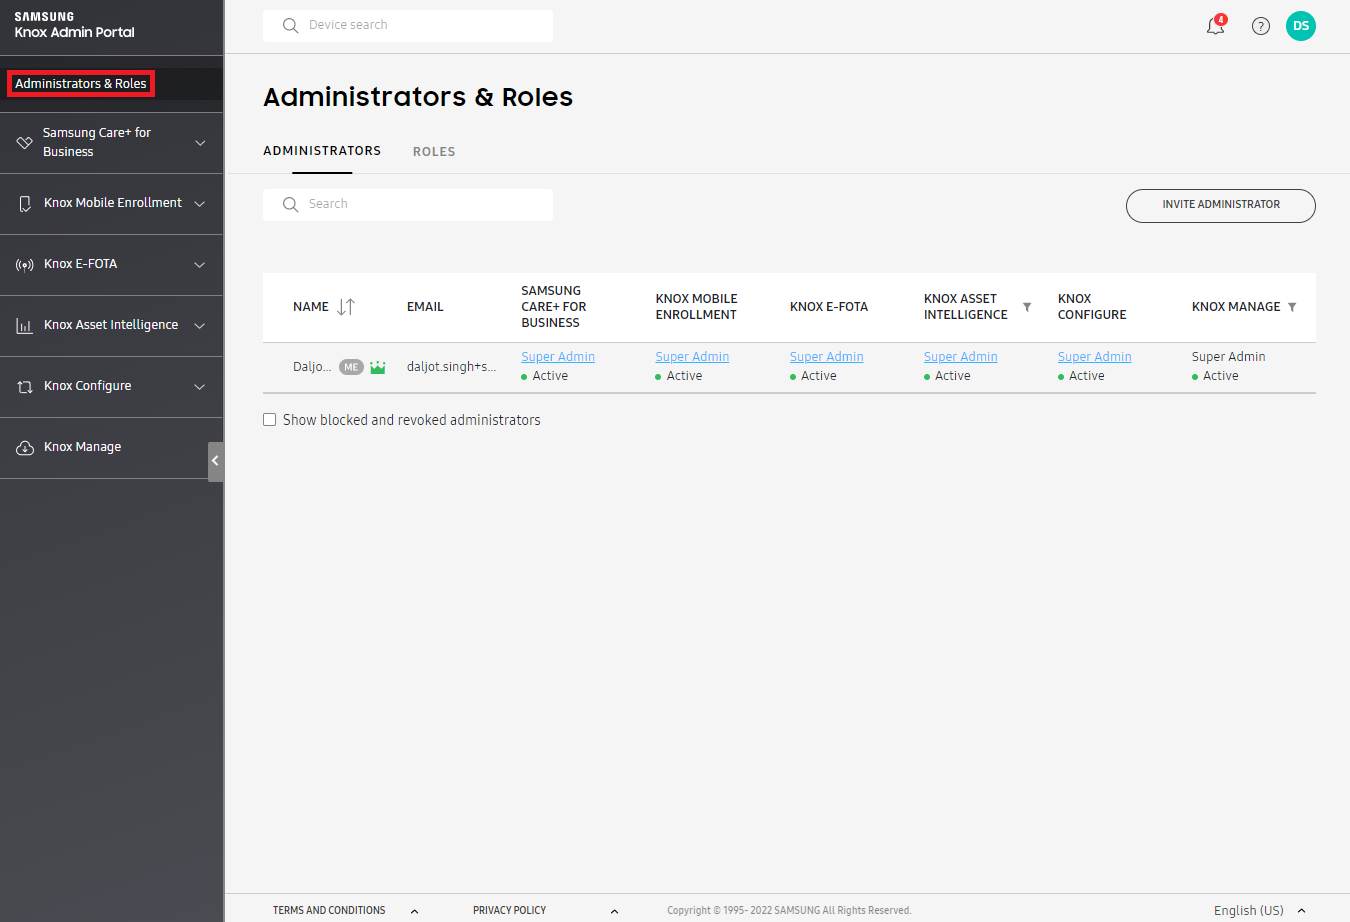 The new Administrators & Roles page